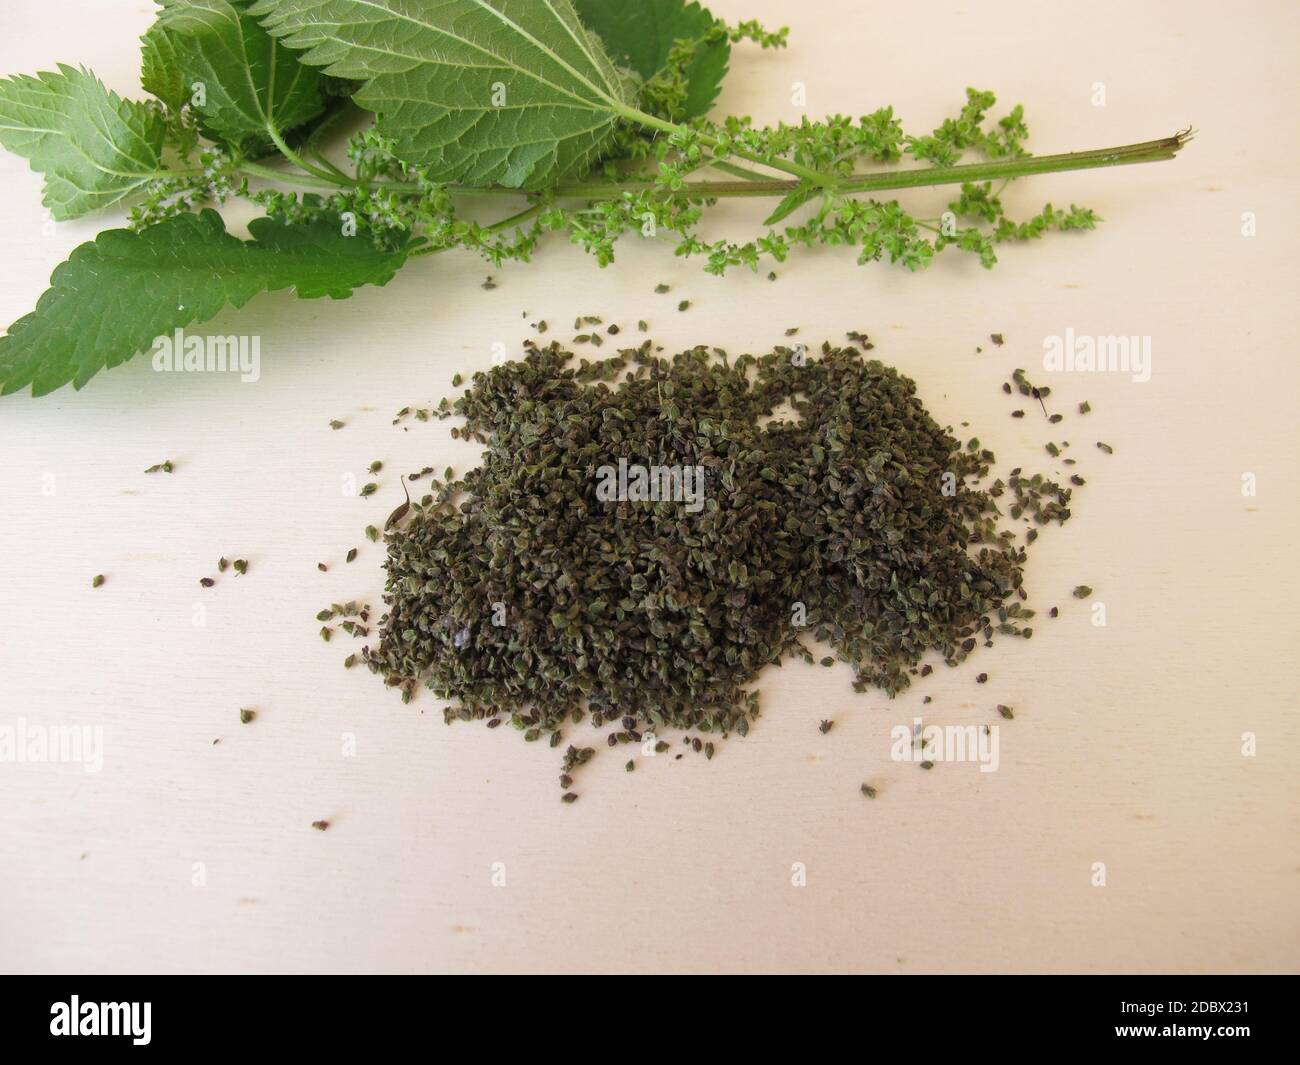 Nettle and dried nettle seeds on a wooden board Stock Photo